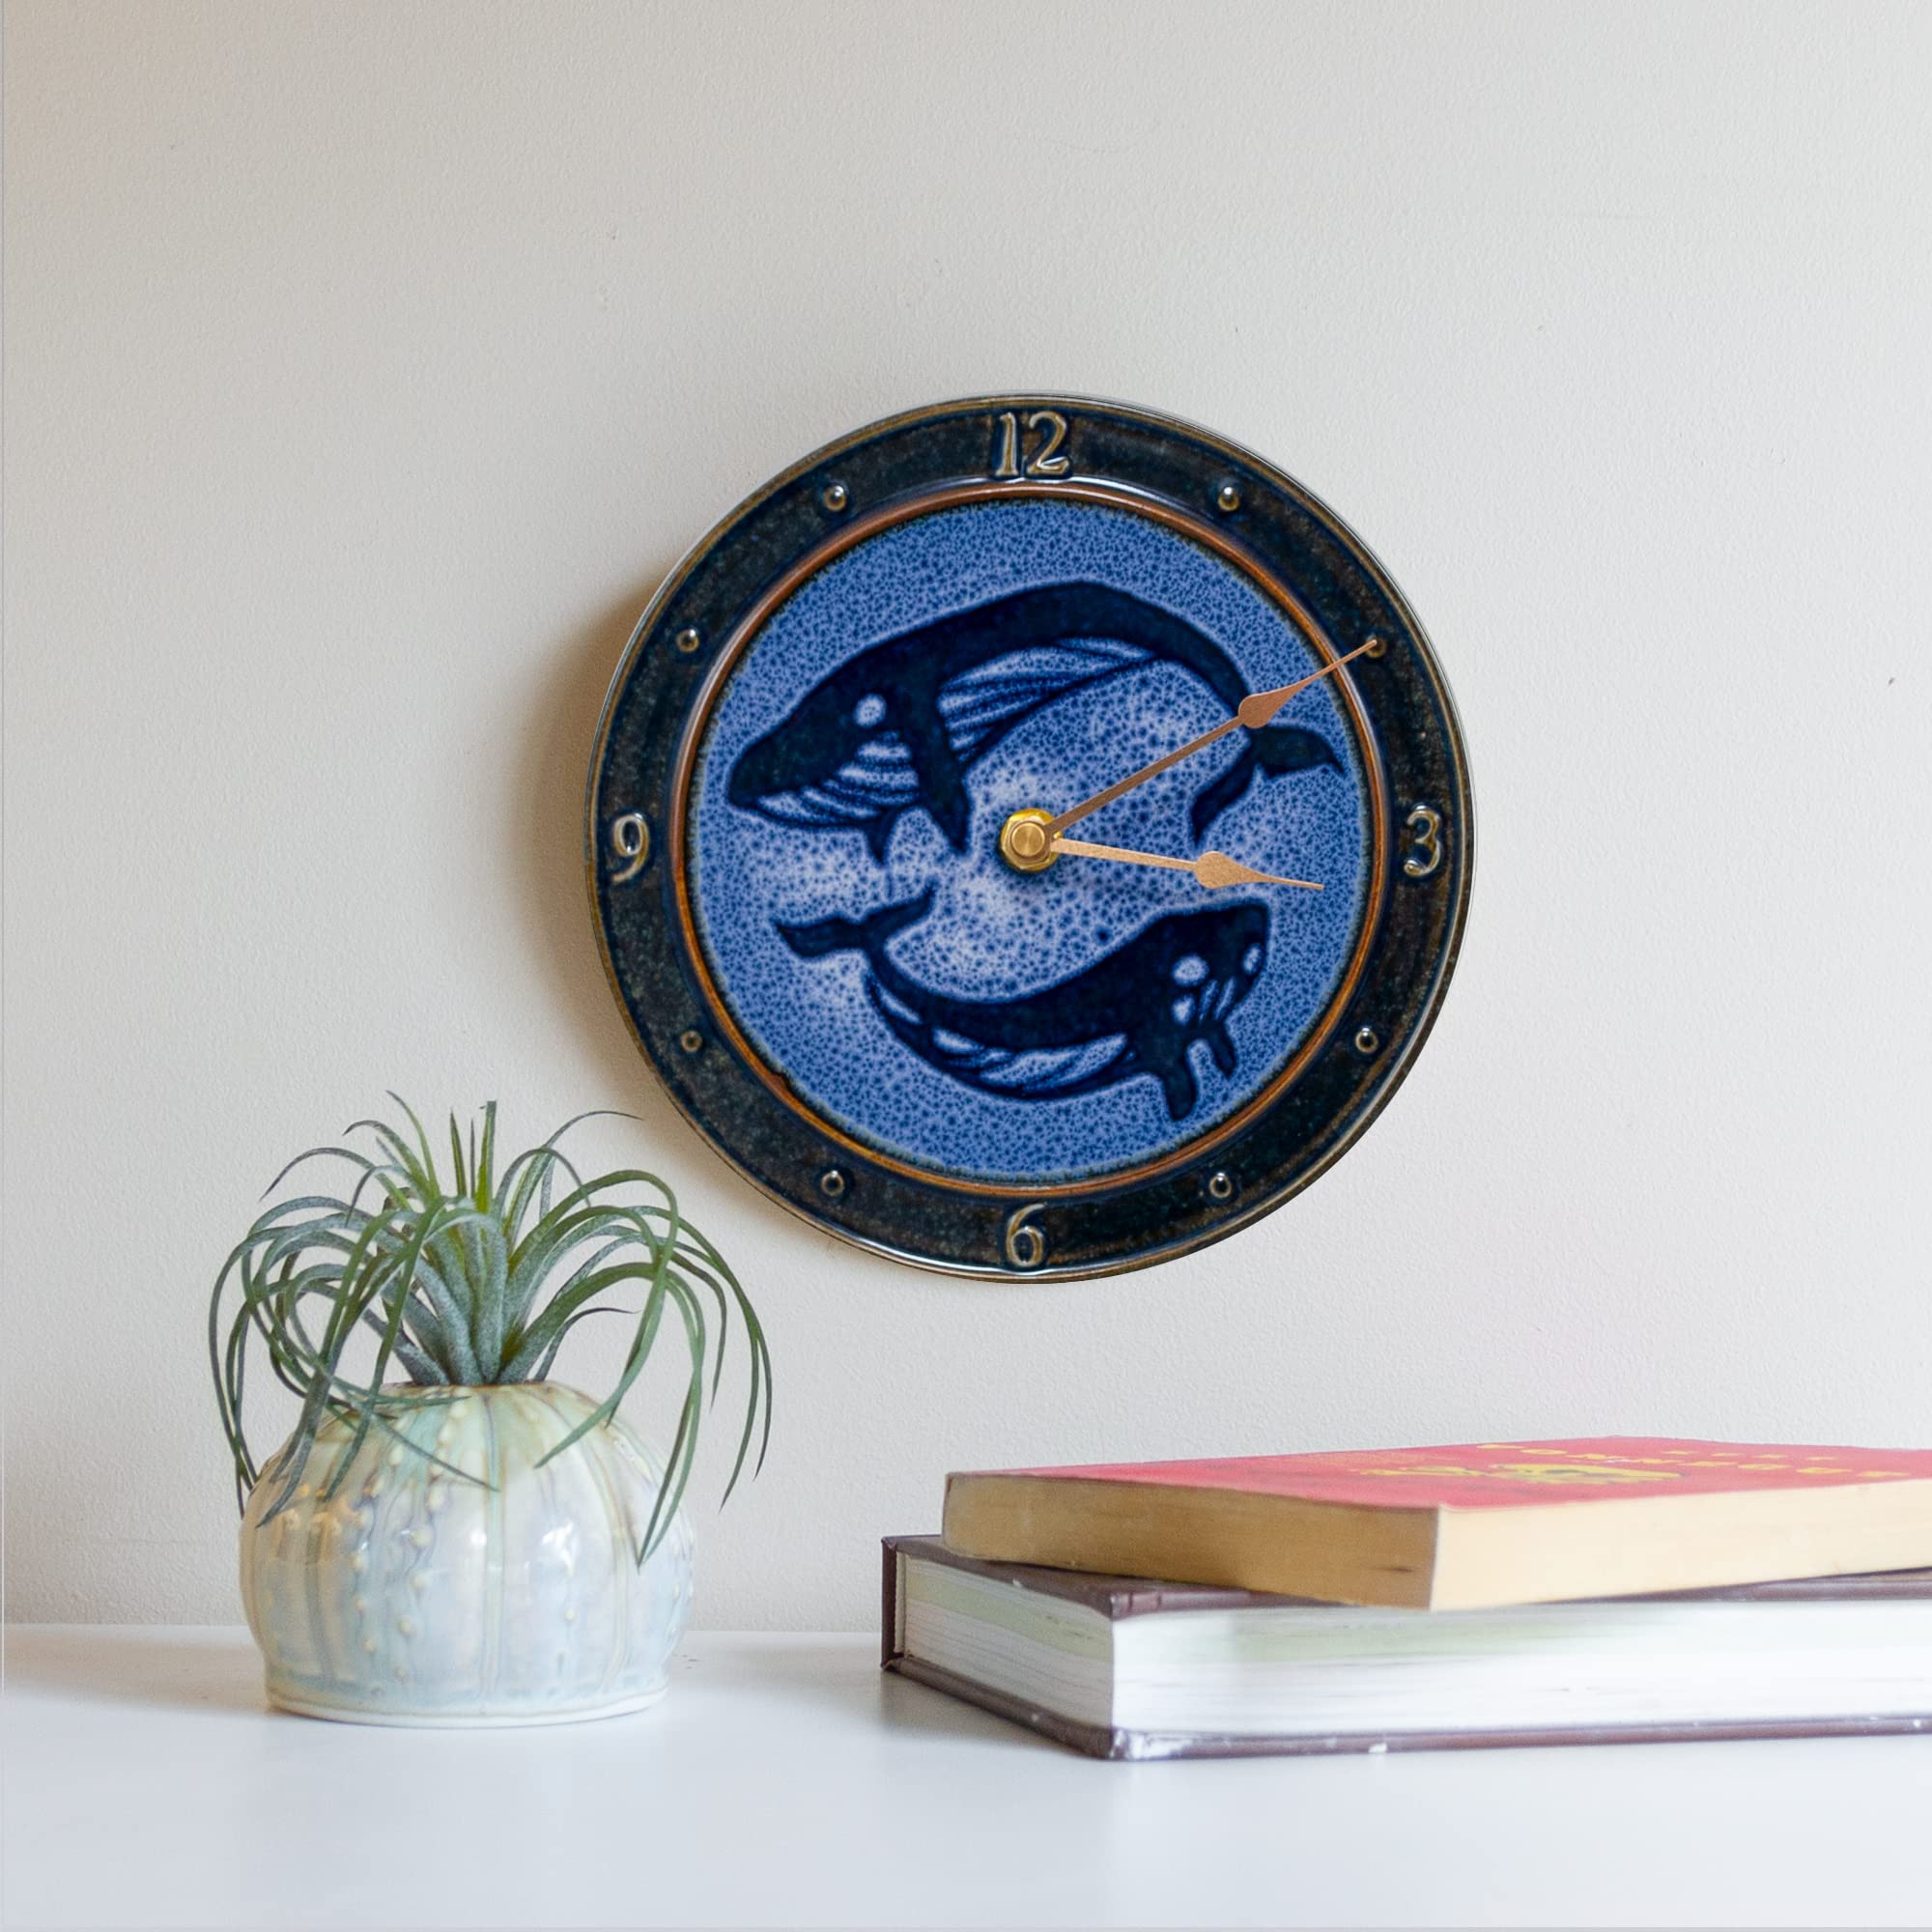 Georgetown Pottery Ceramic Large Wall Clock (8 inch) Handmade, Made in USA (Blue Whale)